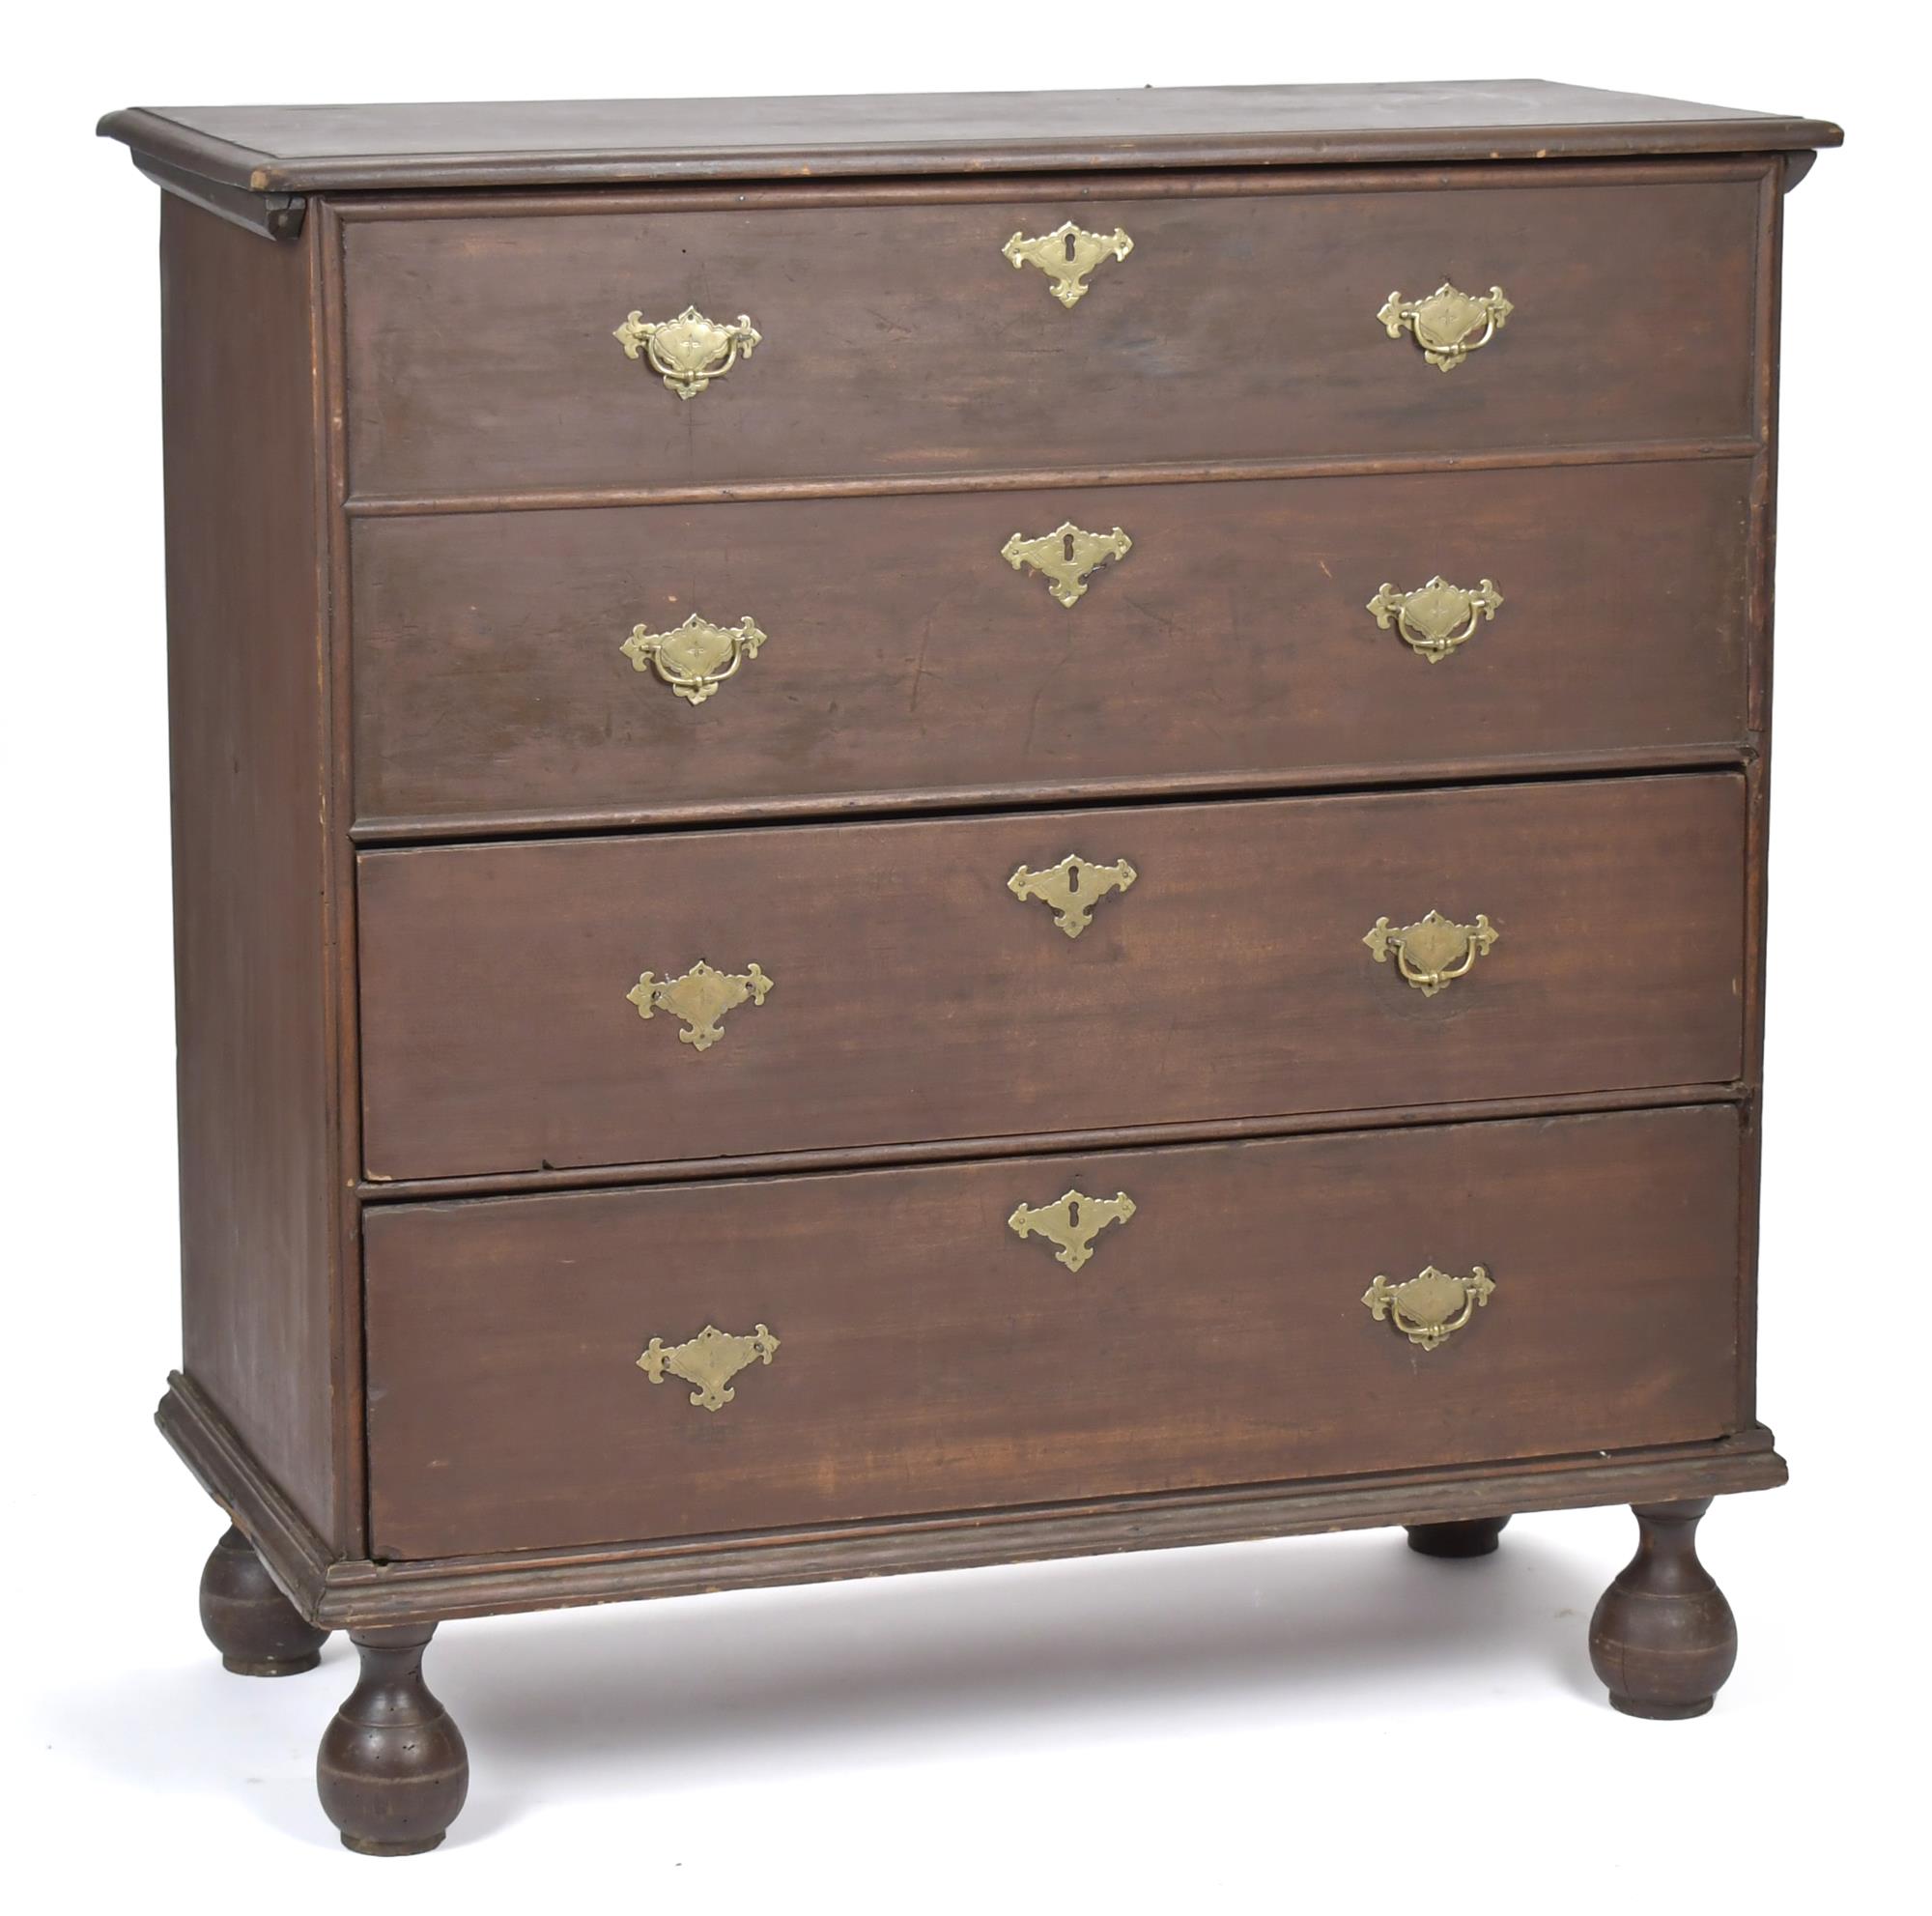 WM AND MARY BALL FOOT BLANKET CHEST,